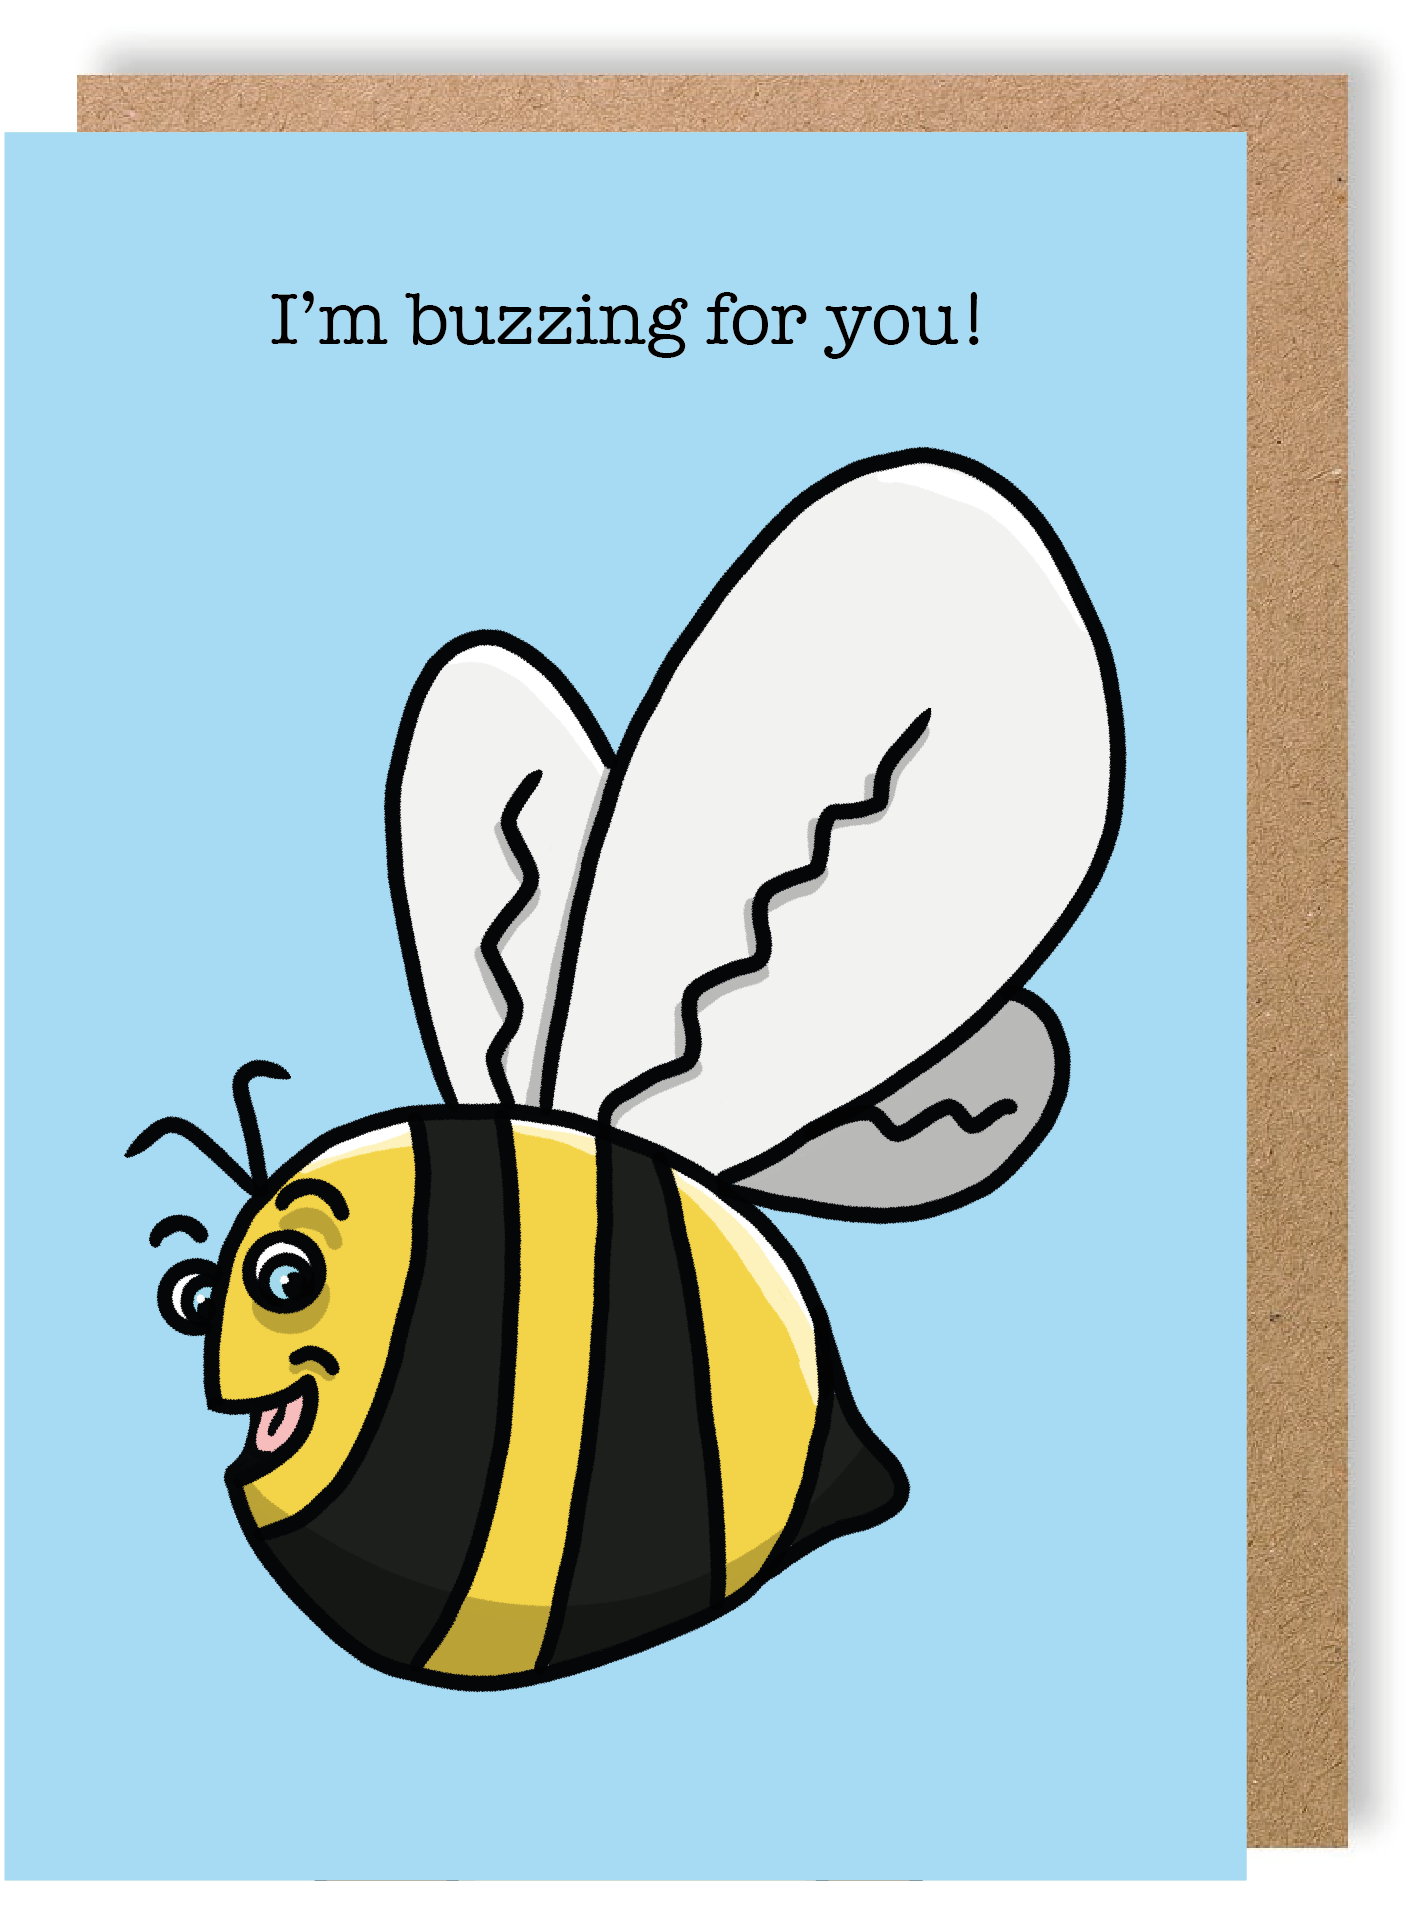 I'm Buzzing For You  - Bee - Greetings Card - LukeHorton Art